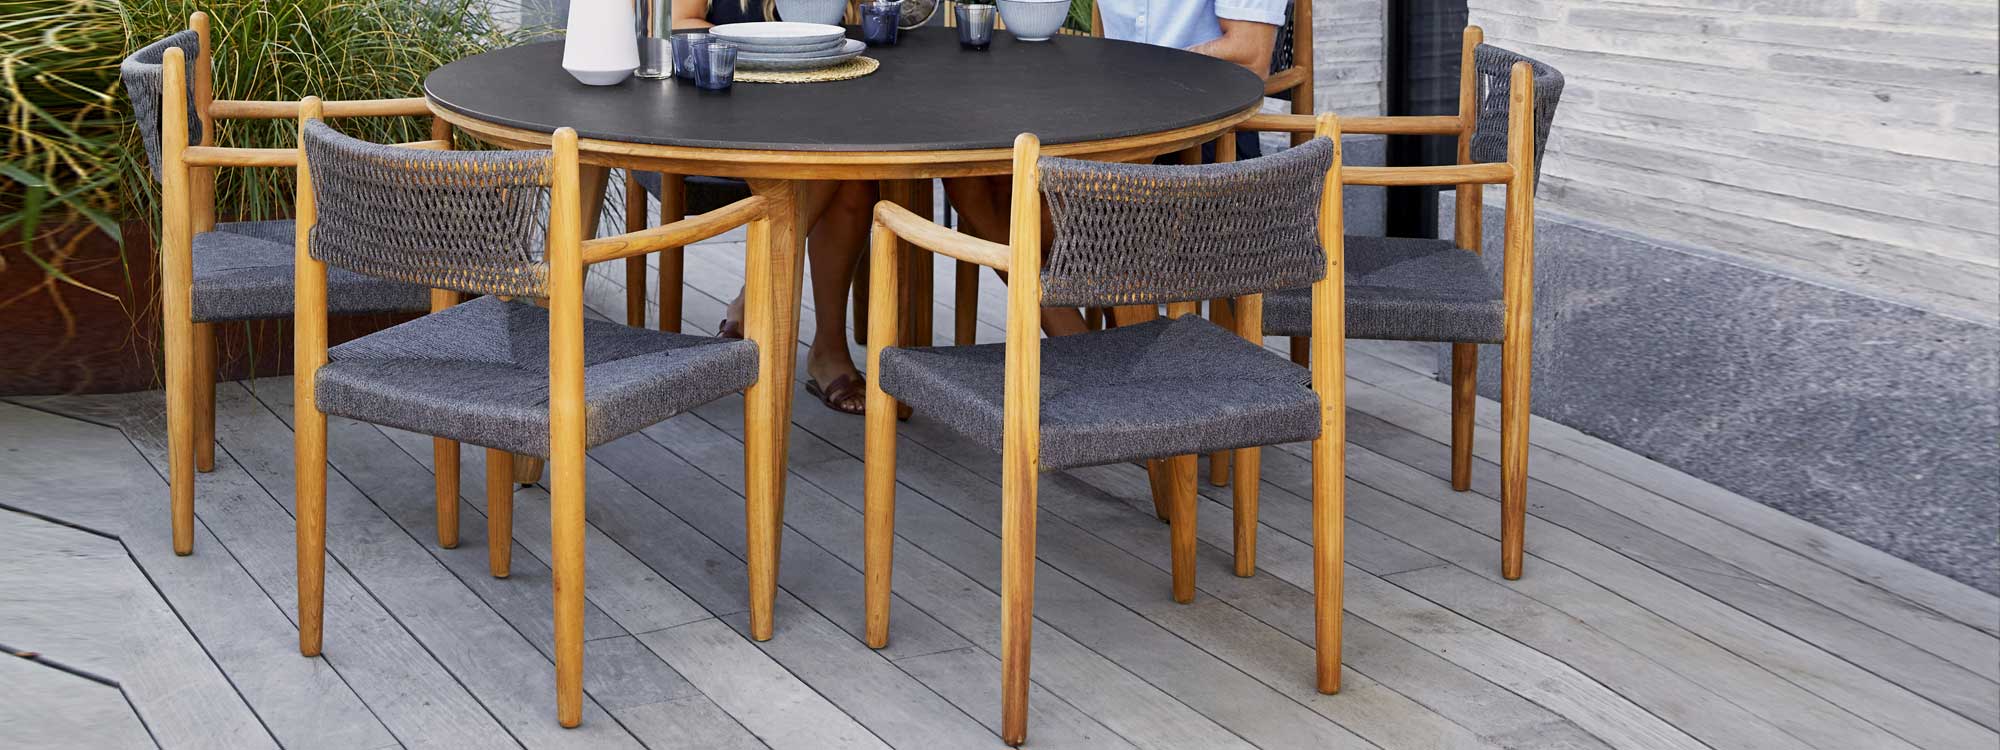 Image of Royal Teak armchairs with grey SoftRope seat and back by Caneline garden furniture